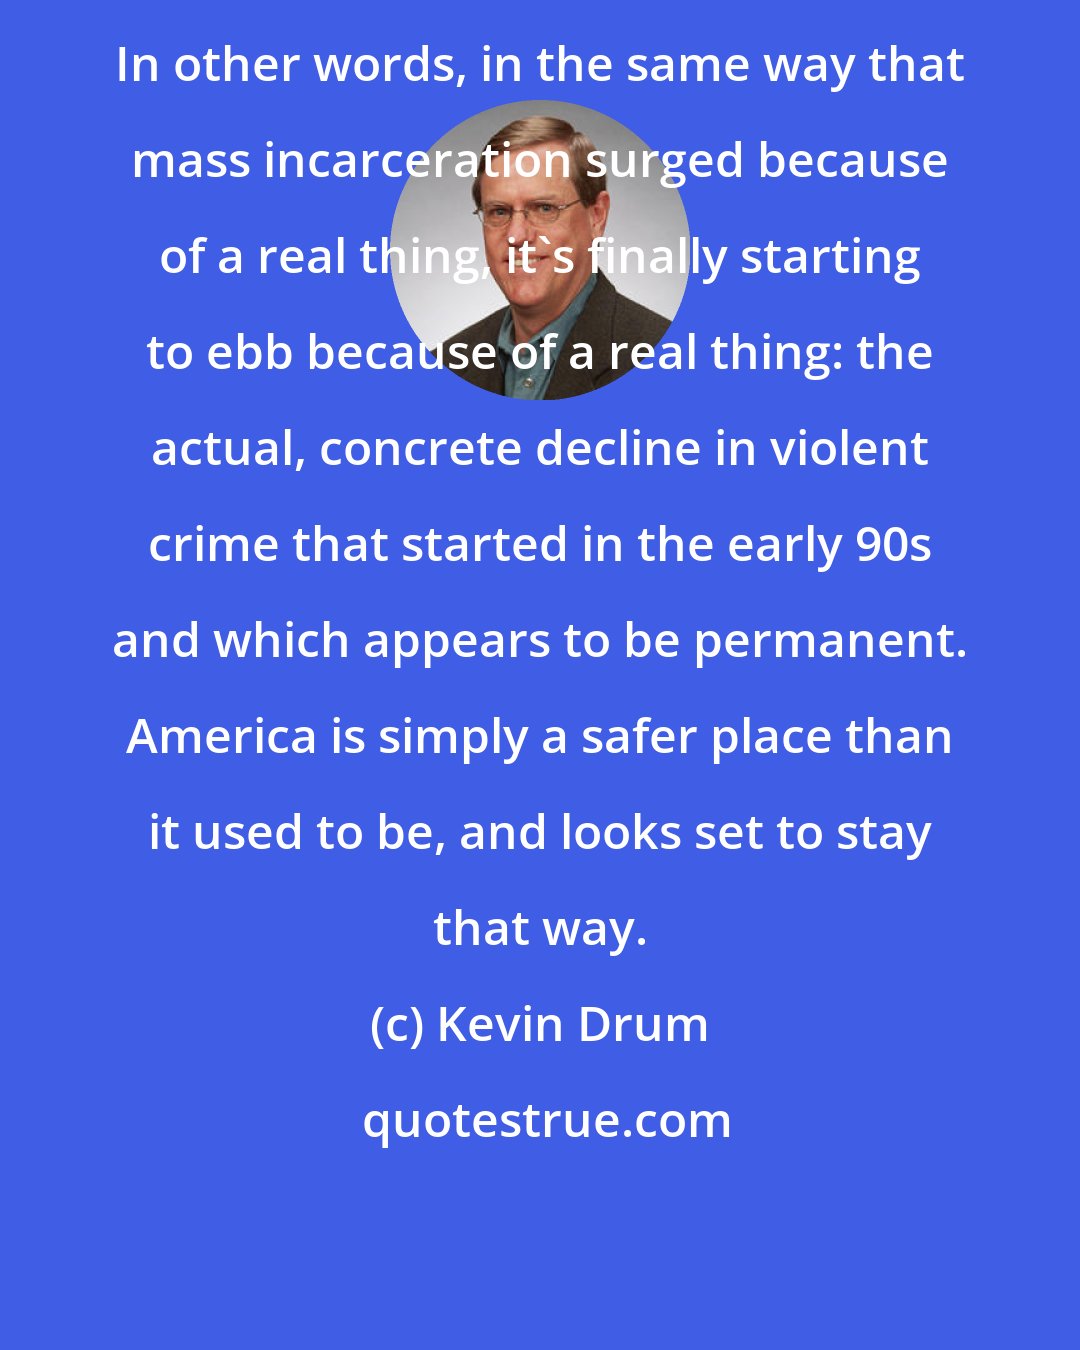 Kevin Drum: In other words, in the same way that mass incarceration surged because of a real thing, it's finally starting to ebb because of a real thing: the actual, concrete decline in violent crime that started in the early 90s and which appears to be permanent. America is simply a safer place than it used to be, and looks set to stay that way.